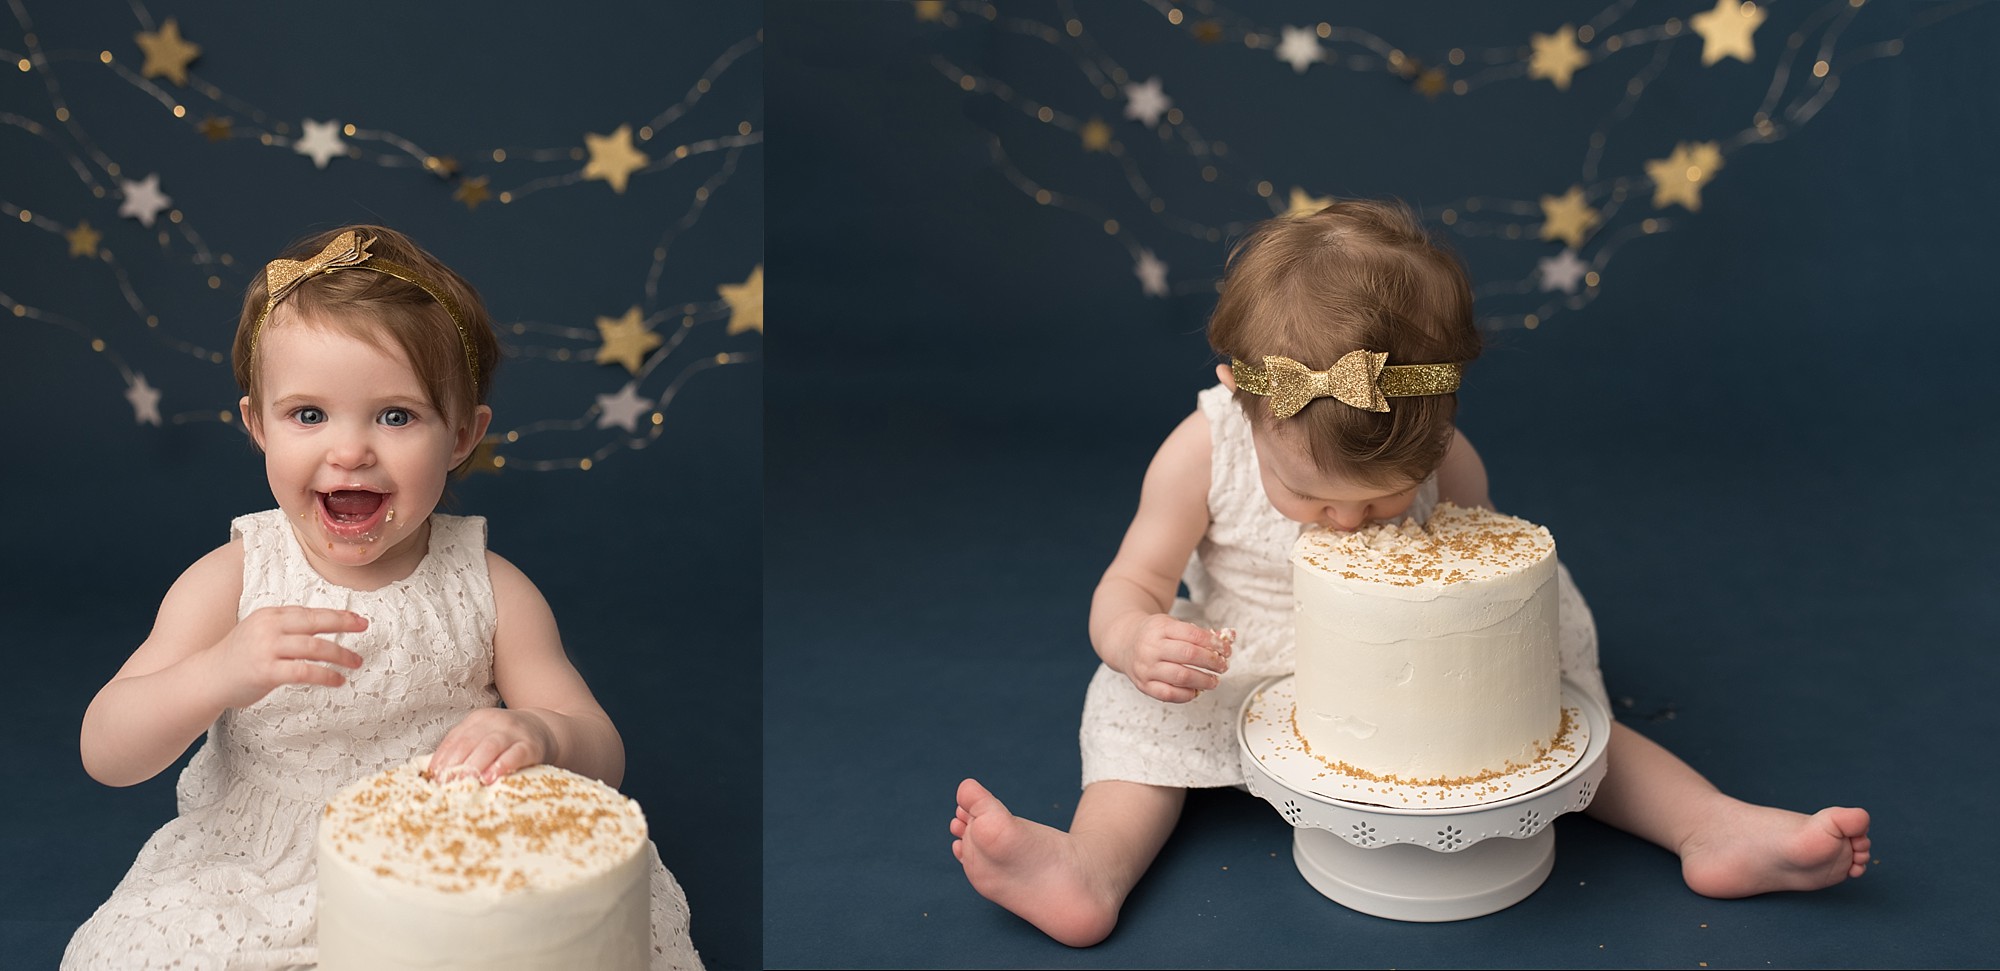 little girl biting a cake with no hands